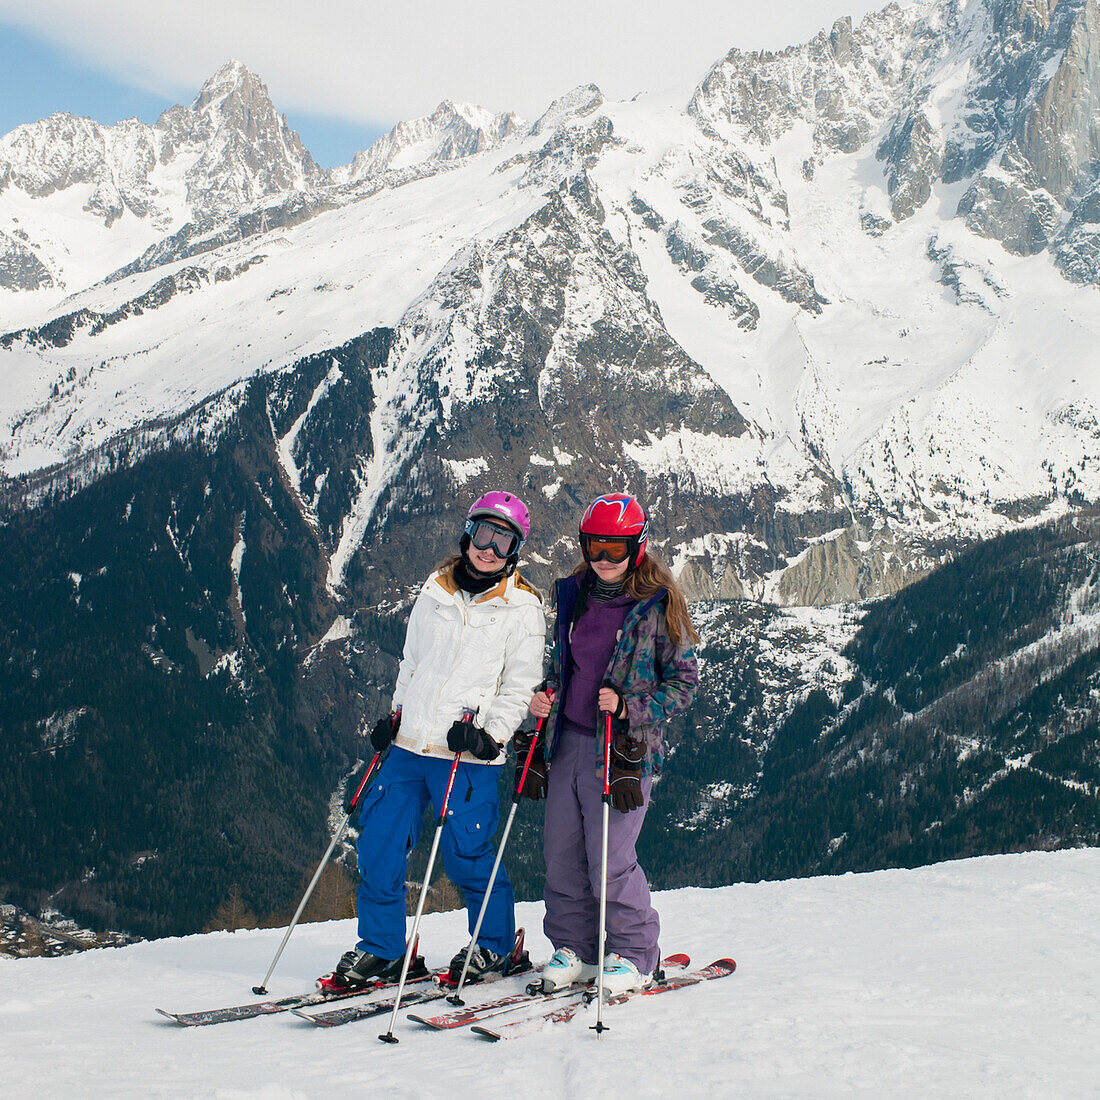 Two Girls Skiing In The French Alps; Chaminox-Mont-Blanc Rhone-Alpes France